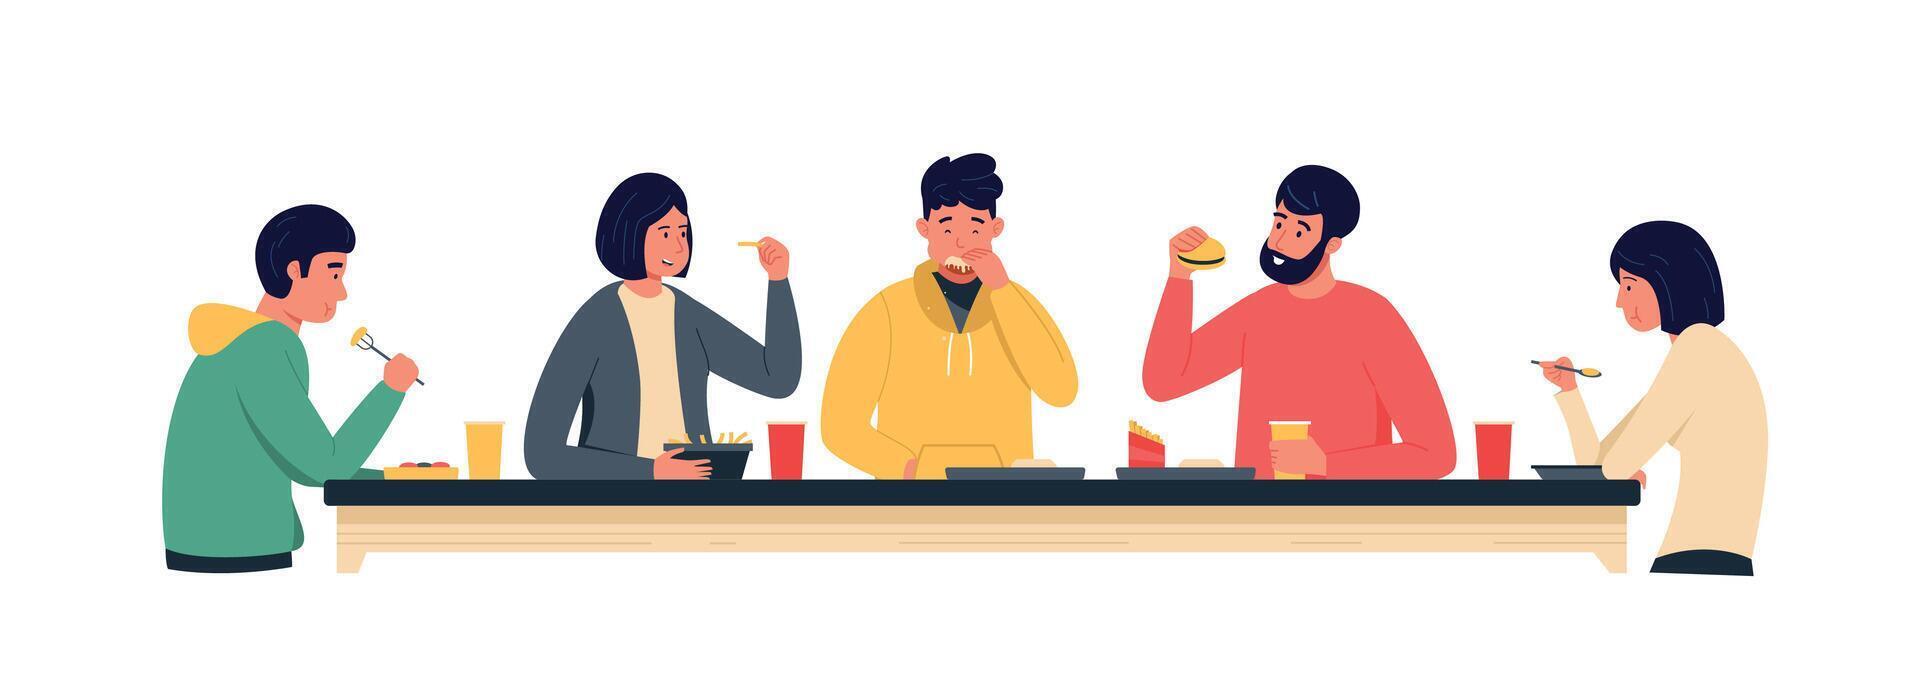 Customers eating food. Cartoon people have breakfast lunch and brunch in cafe or restaurant, men and women at the table chewing and tasting food. Vector set